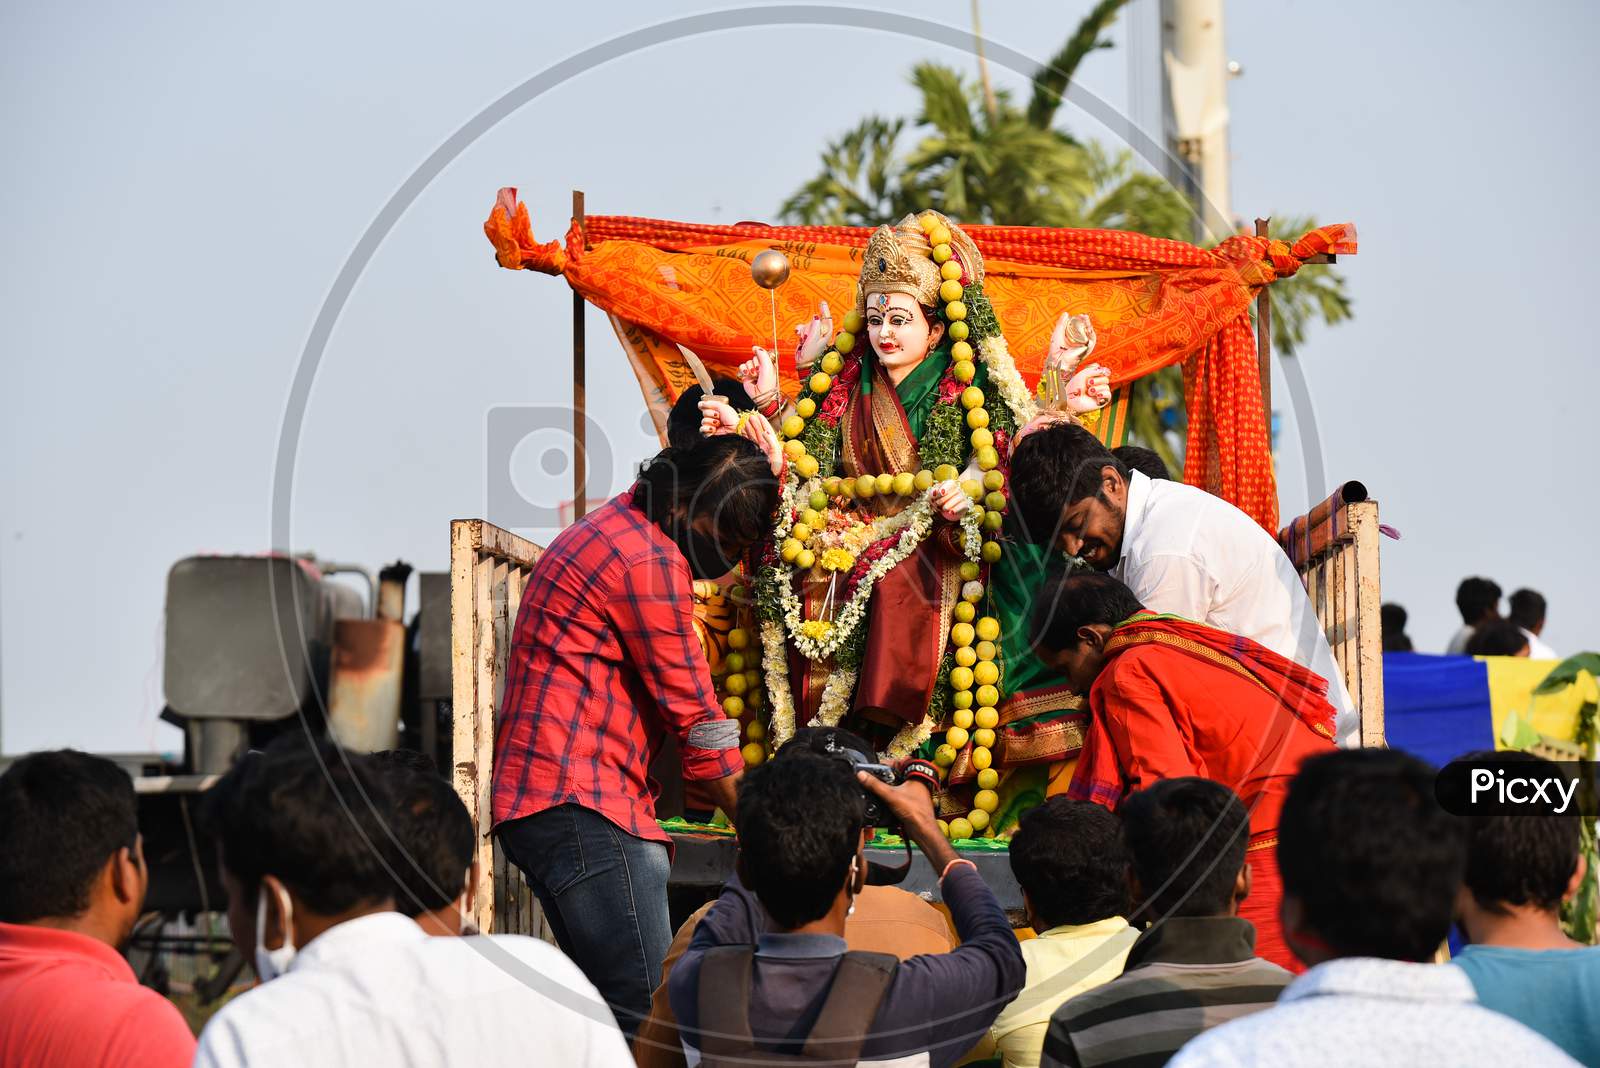 Devotees bring Idols of Goddess Durga for immersion in Hussain Sagar on the last day of Durga Puja/Dasara/Navratri in Hyderabad on October 26, 2020.